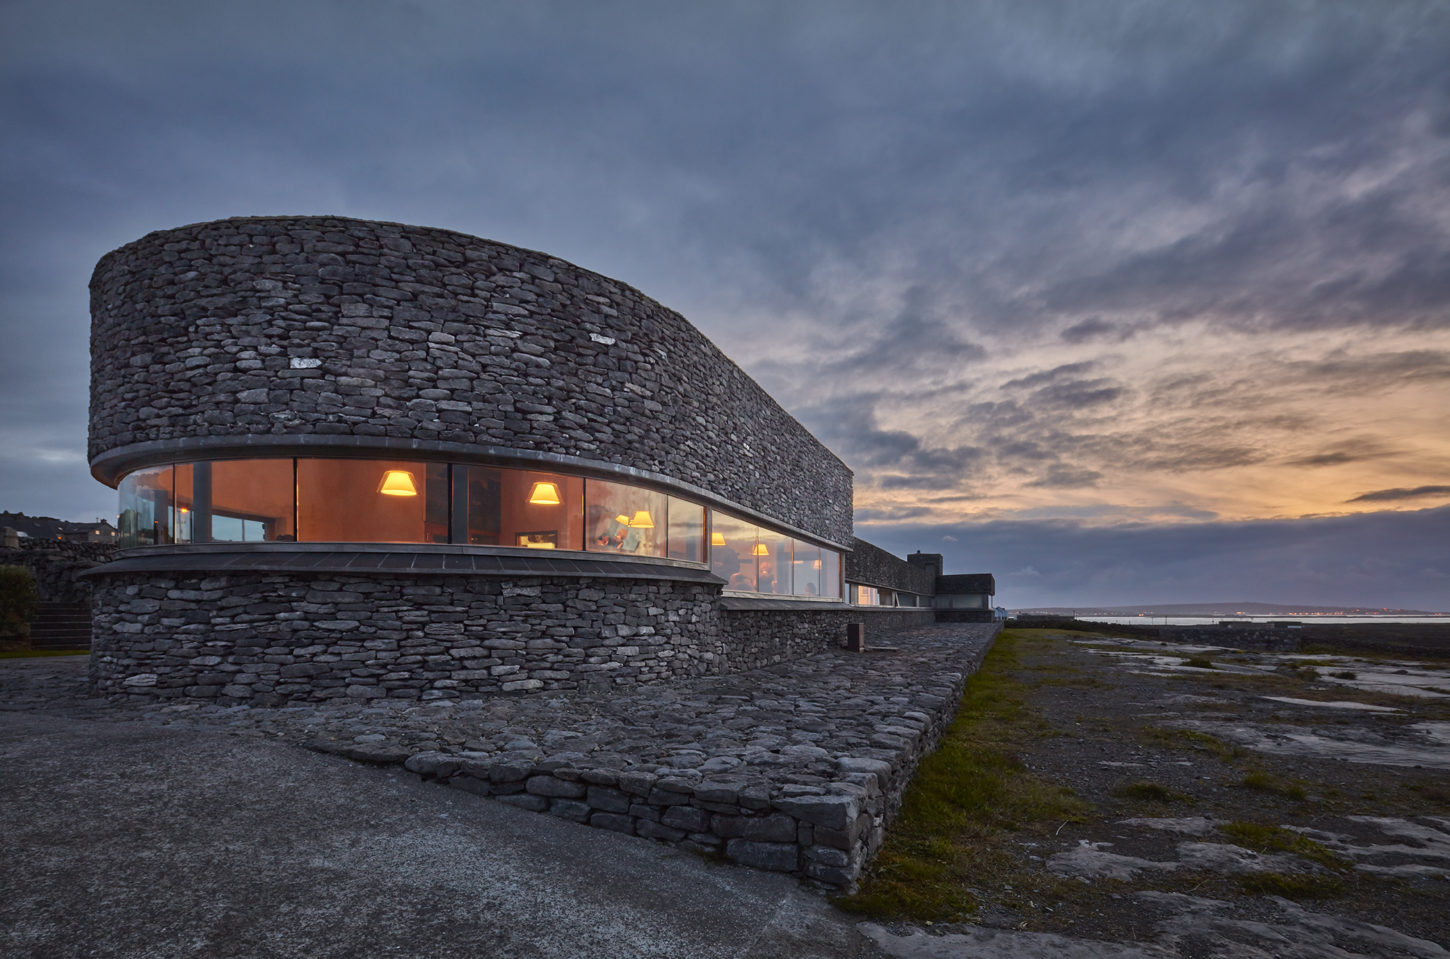 Great food but make it green – Susan Ward Davies rounds up the most sustainable places for a guilt-free gourmet weekend. Inis Meain Aran Islands